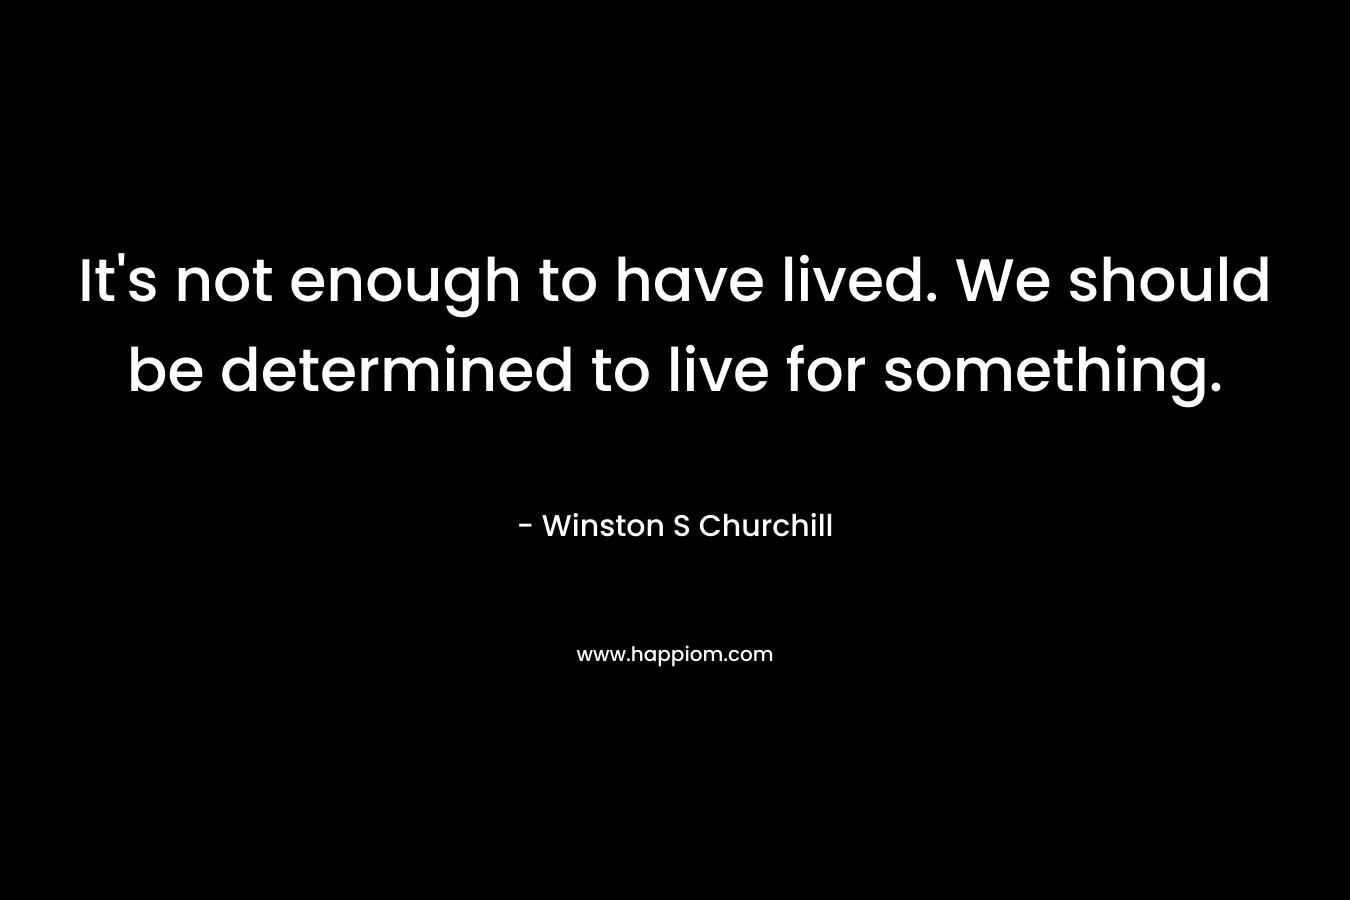 It's not enough to have lived. We should be determined to live for something.